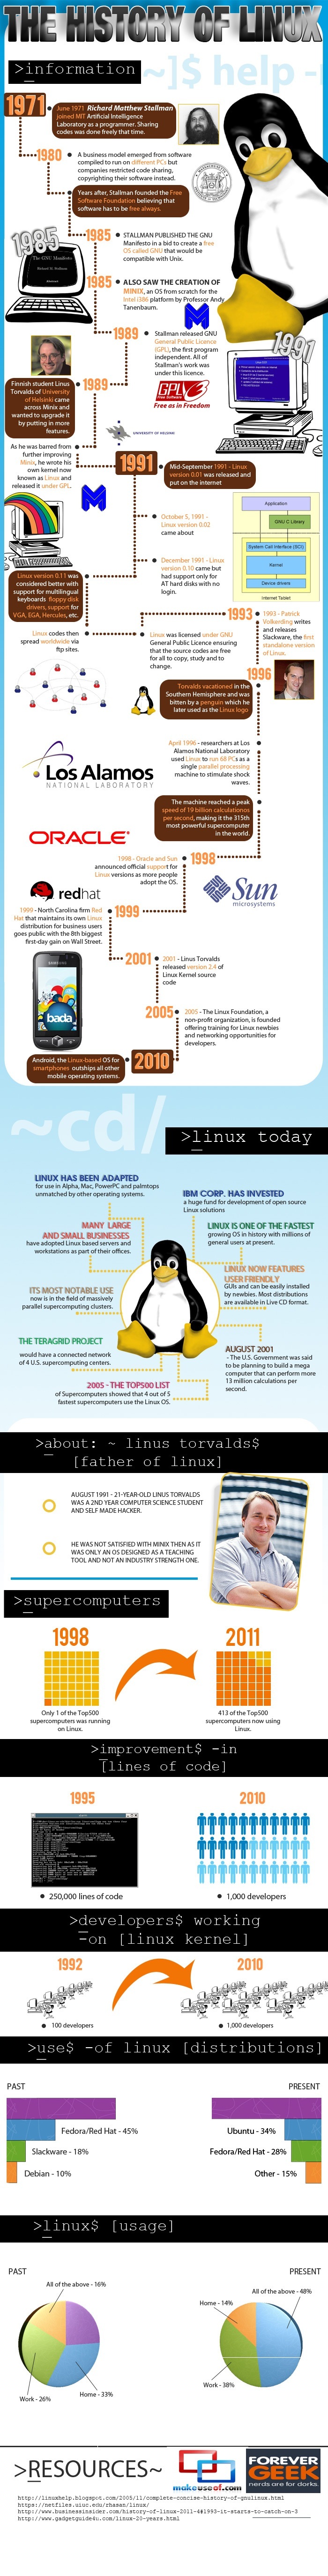 Infographic - history of linux